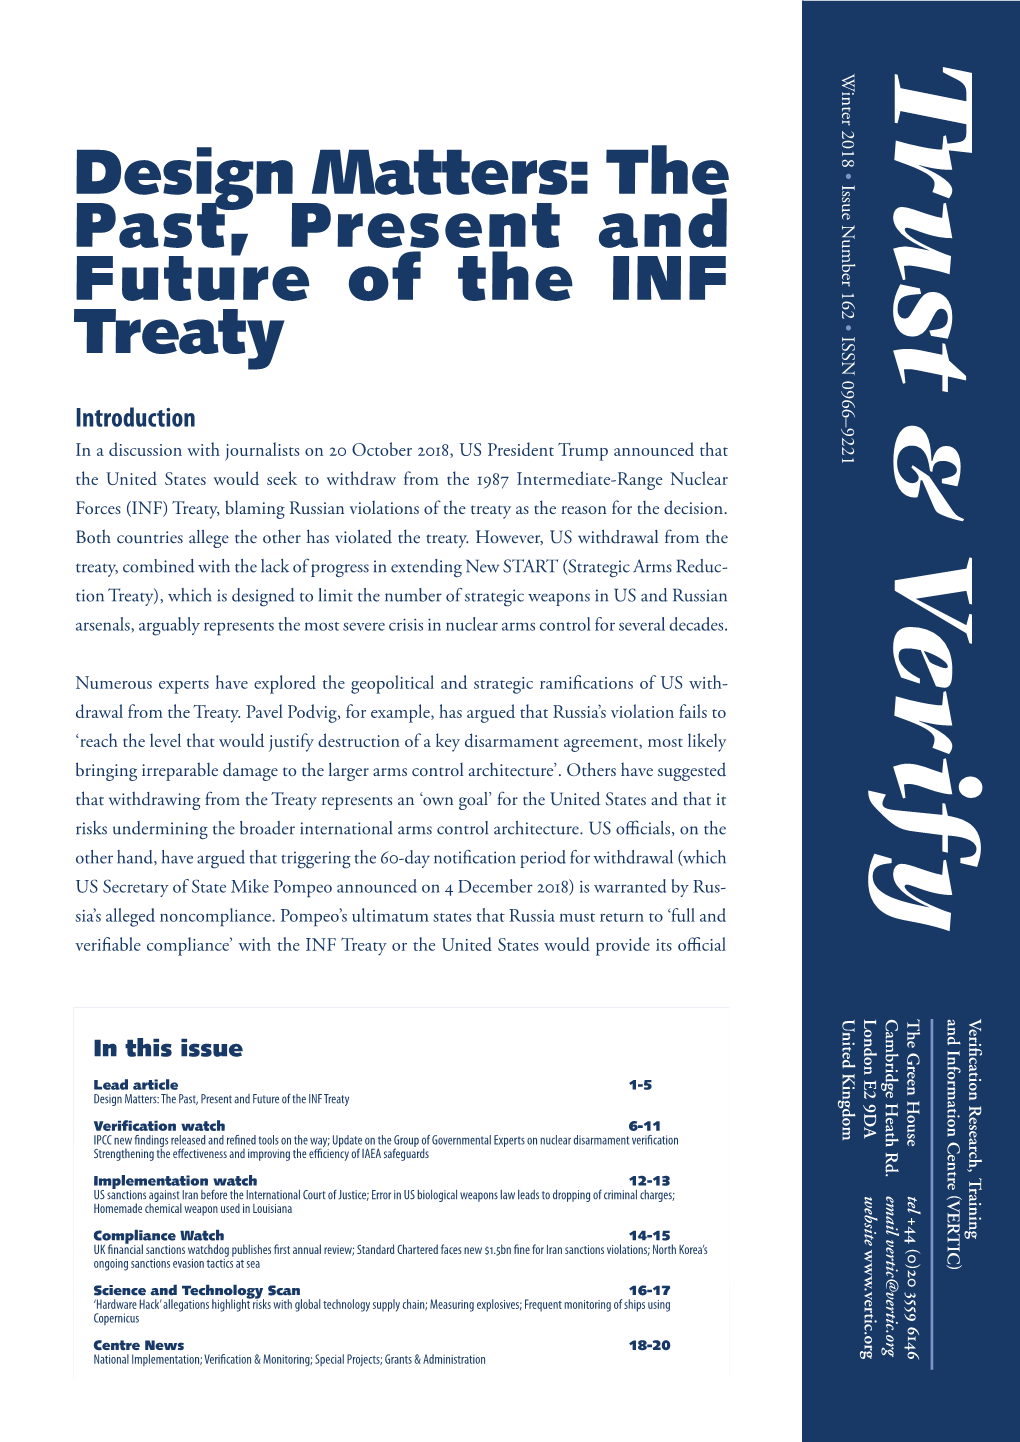 Design Matters: the Past, Present and Future of the INF Treaty